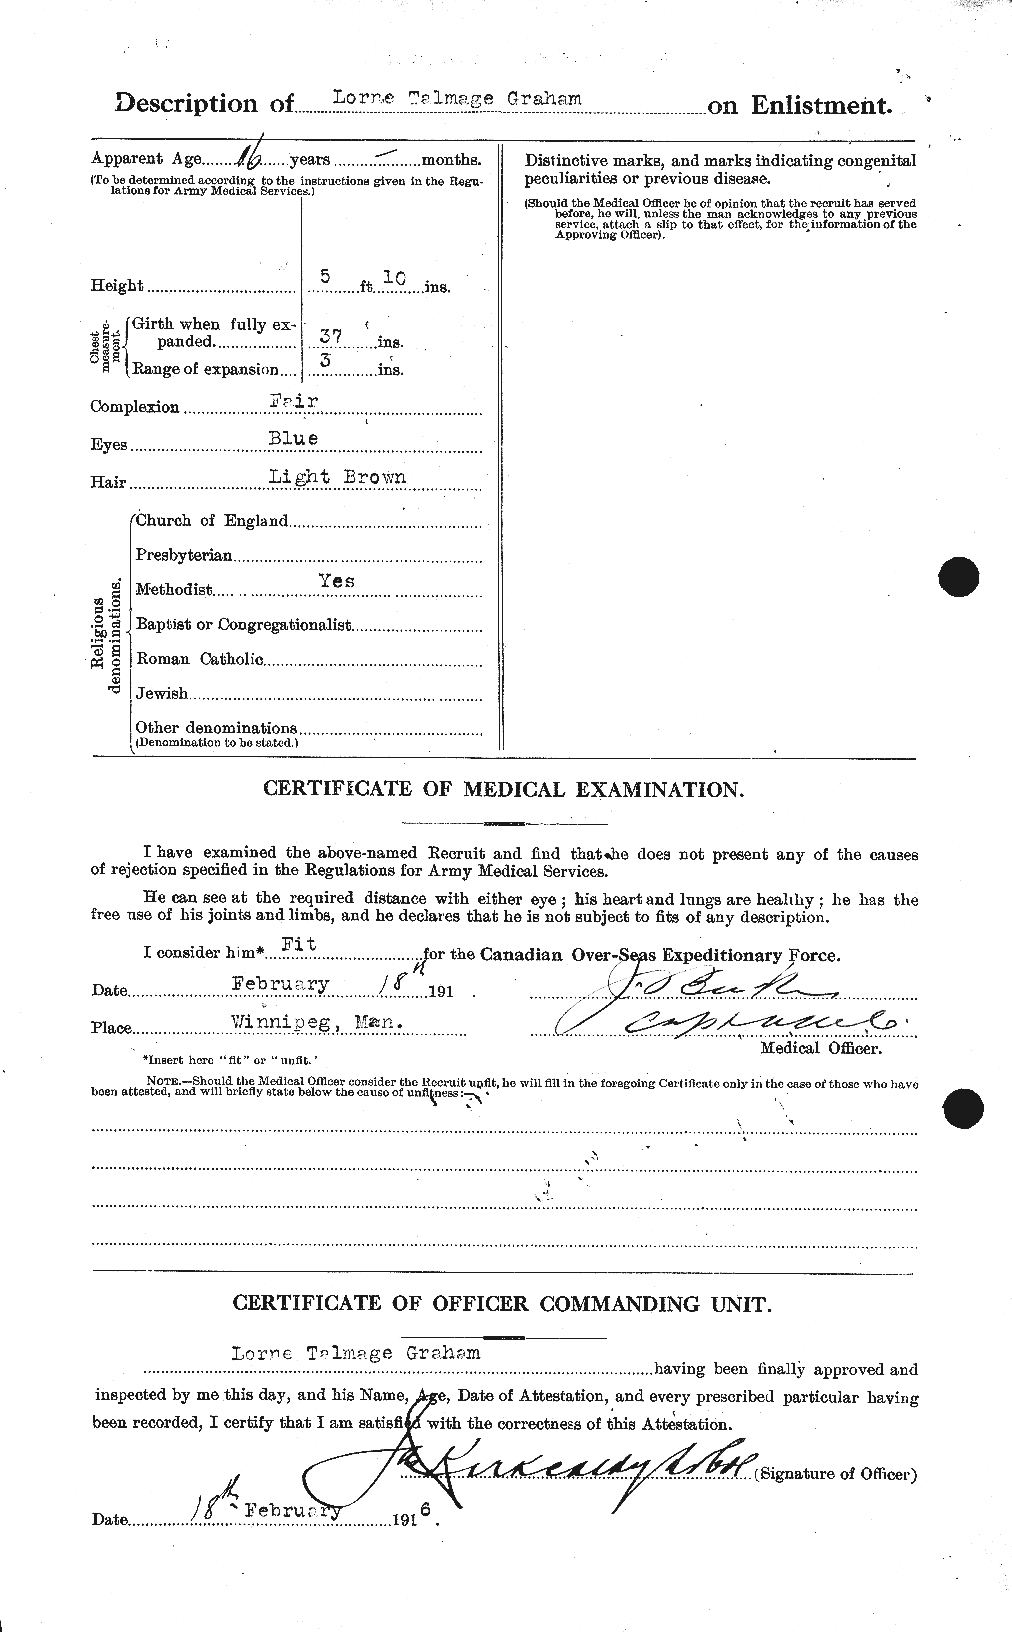 Personnel Records of the First World War - CEF 359282b